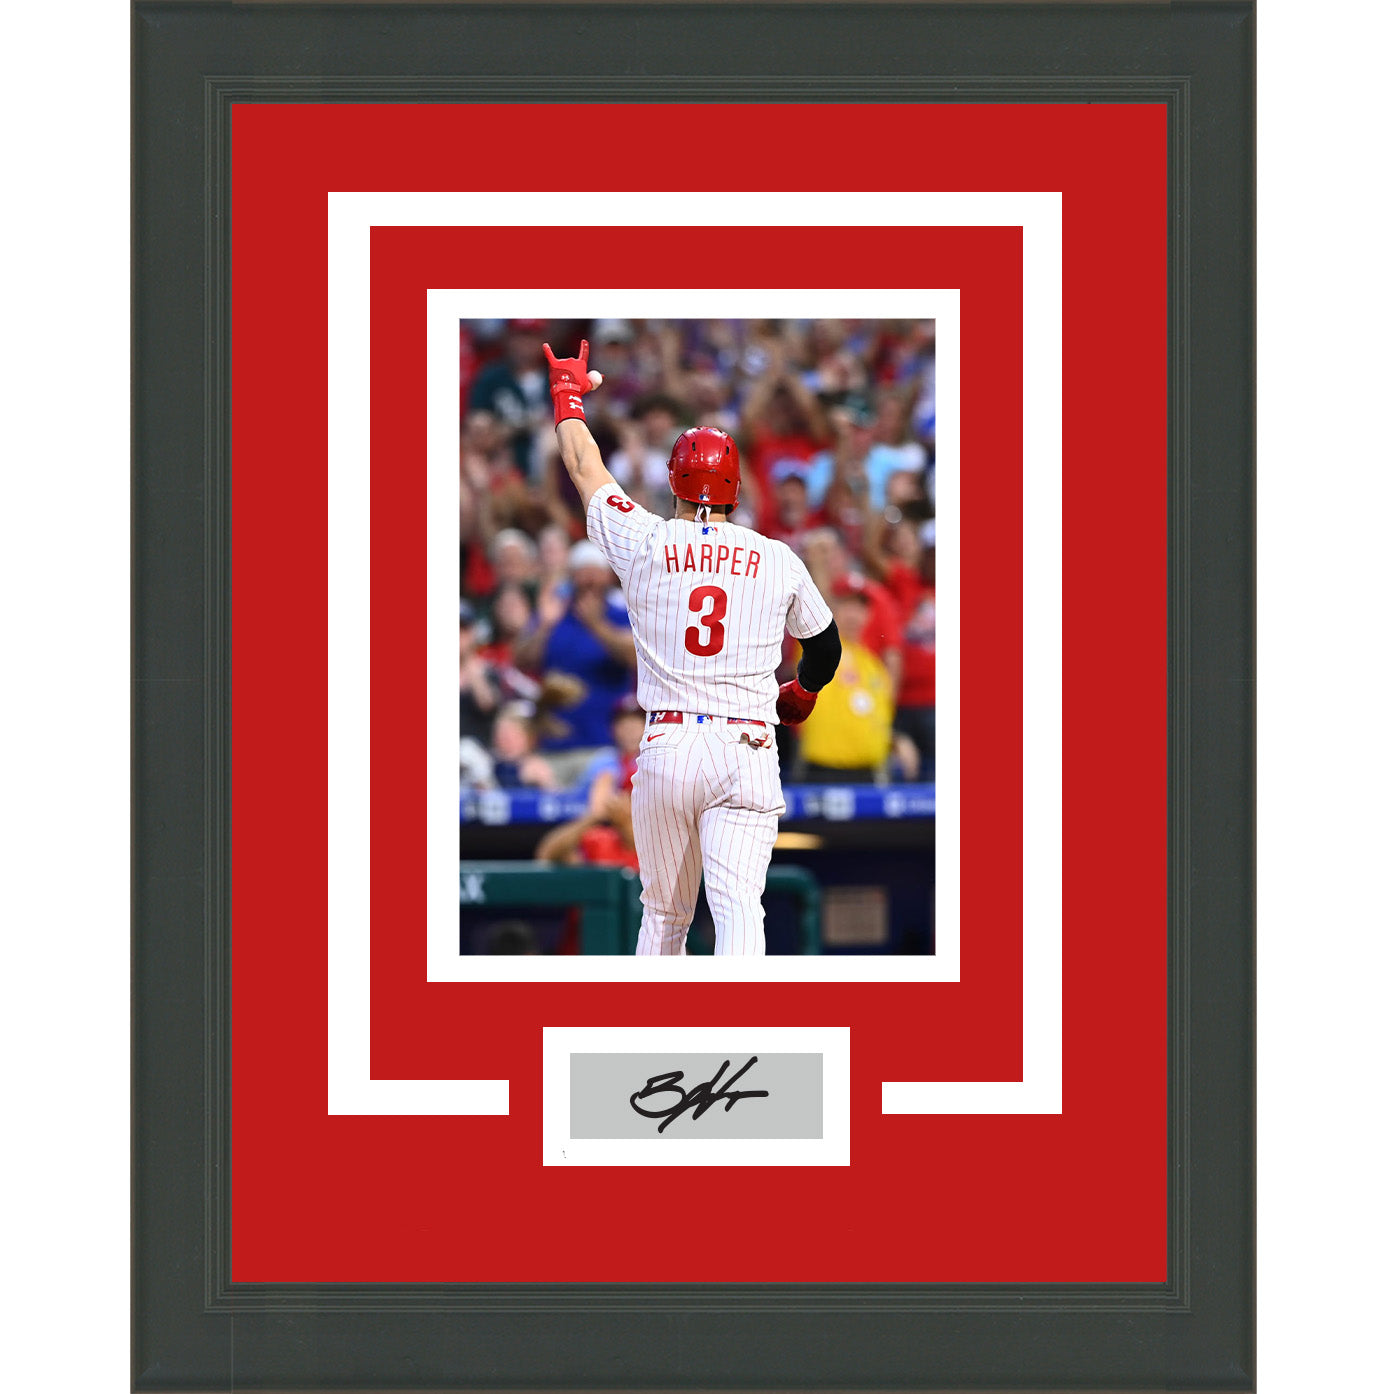 Bryce Harper Autographed and Framed Philadelphia Phillies Jersey